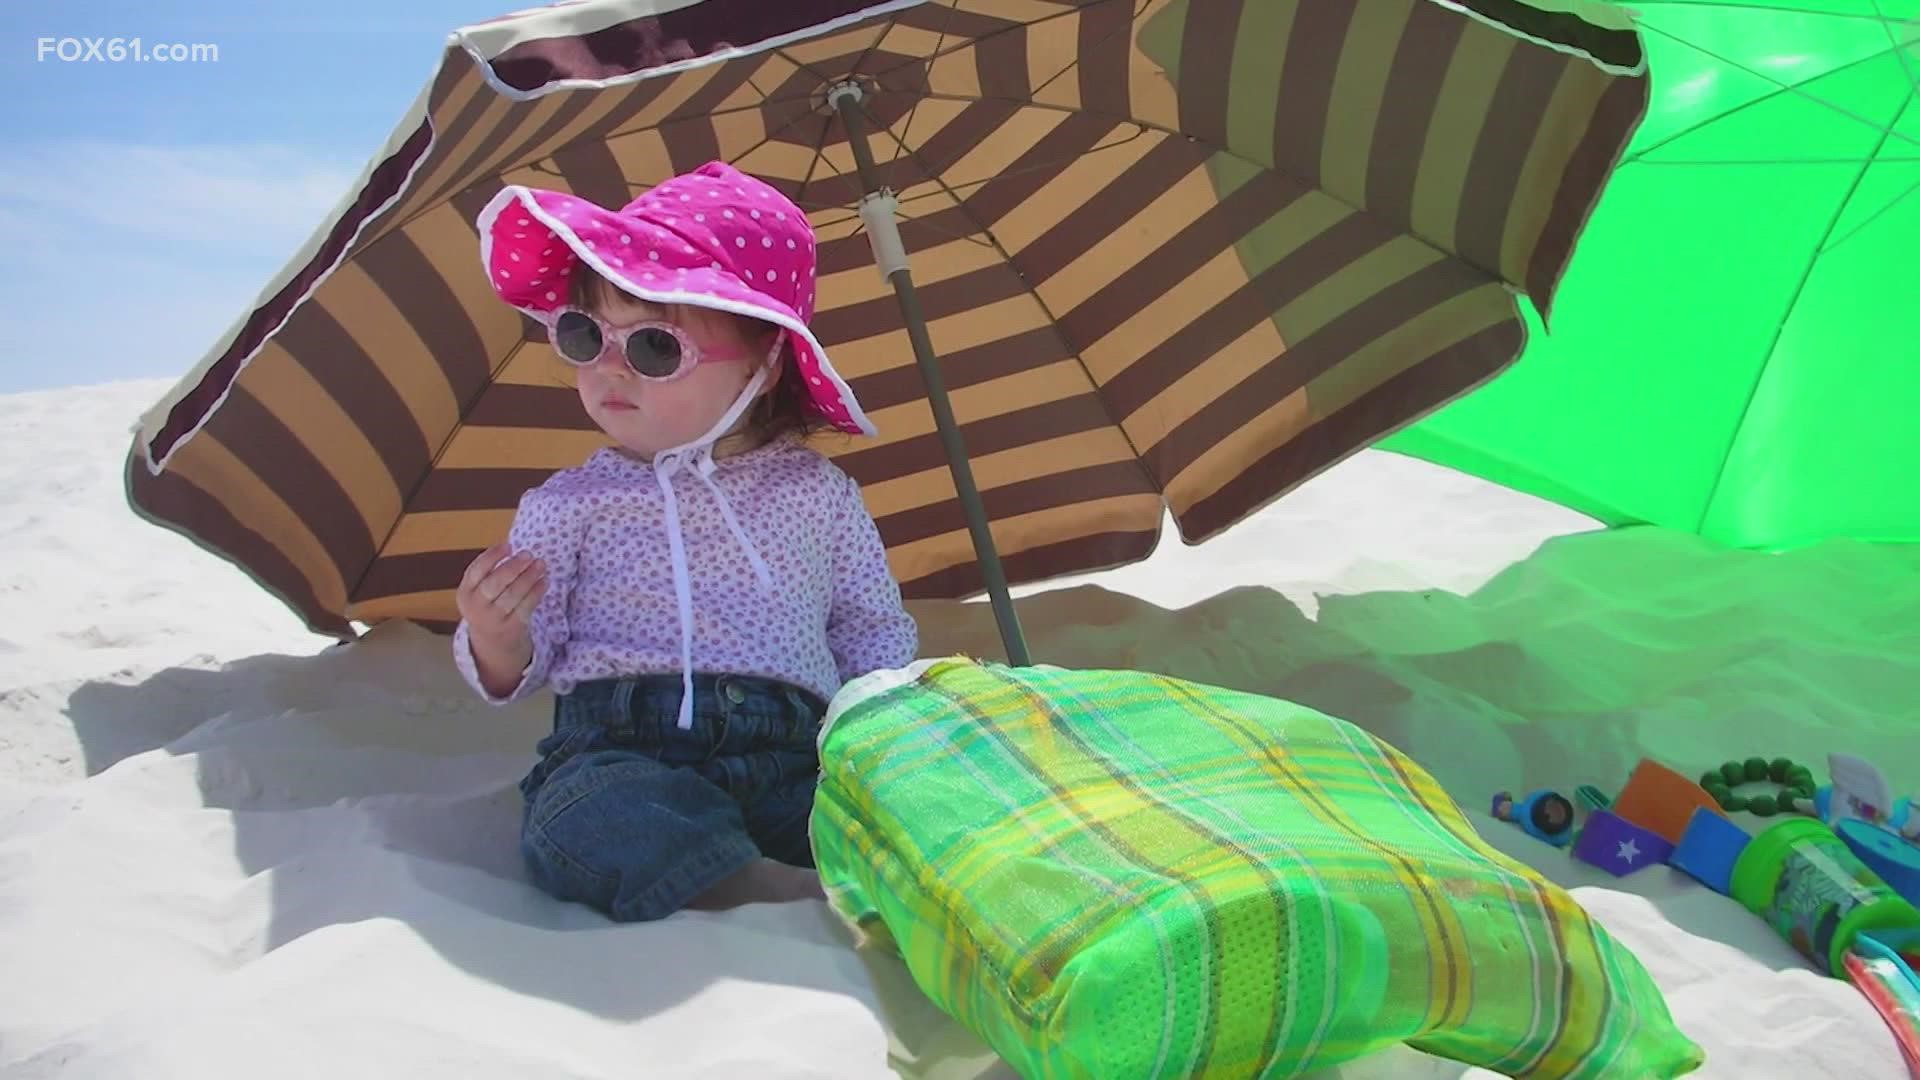 Each day we're getting closer and closer to the start of summer in June. Be sure to protect your littlest ones out in the sun and at the beach!